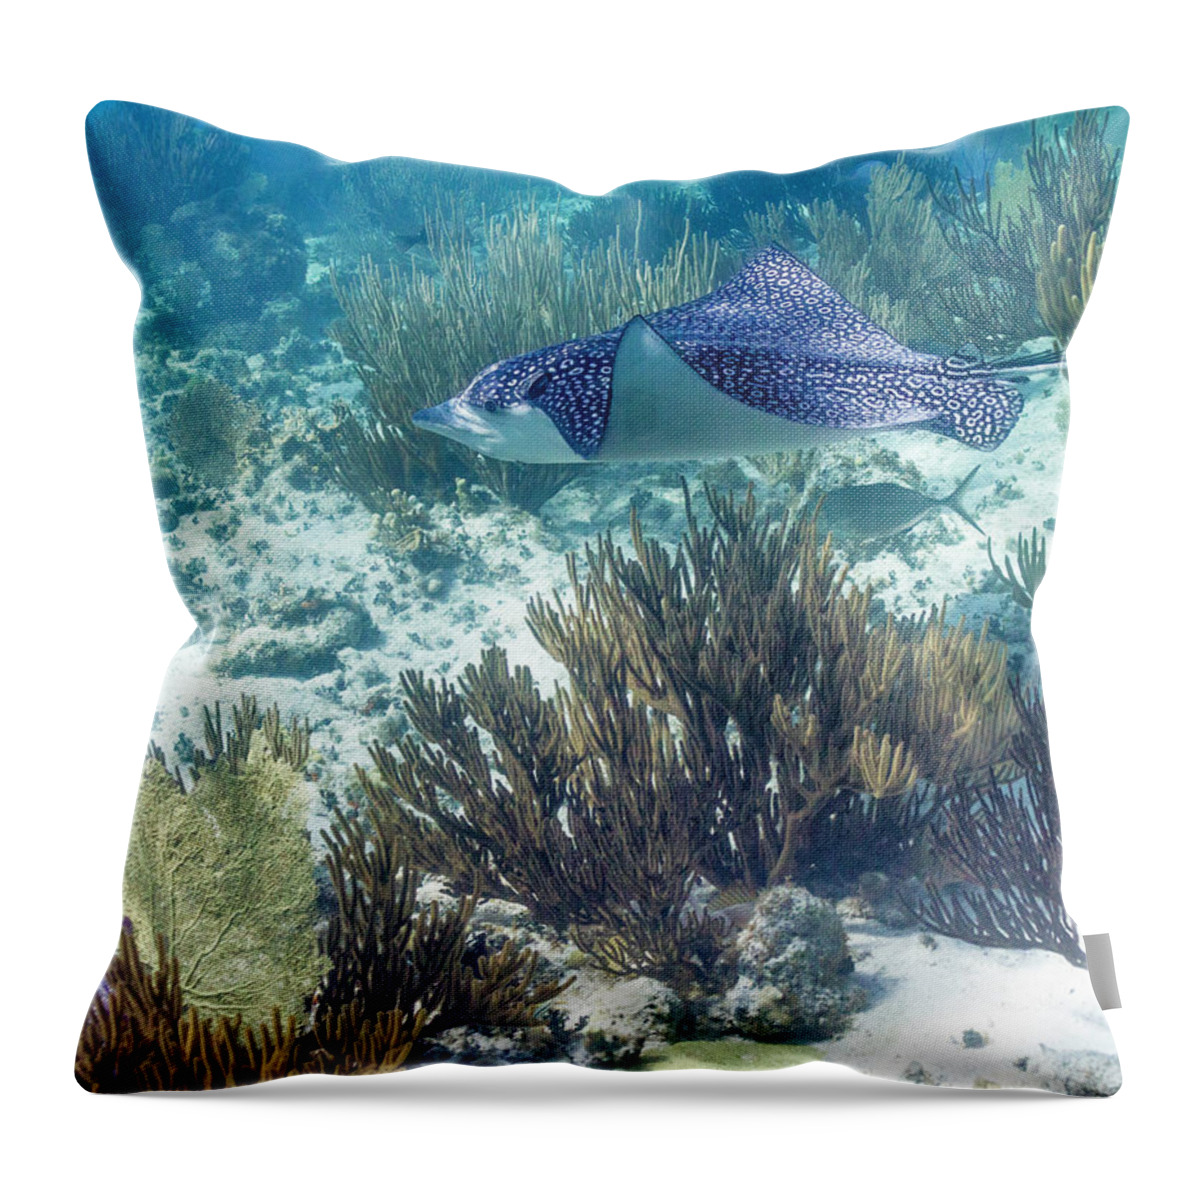 Grand Cayman Throw Pillow featuring the photograph Catch Me If You Can by Lynne Browne